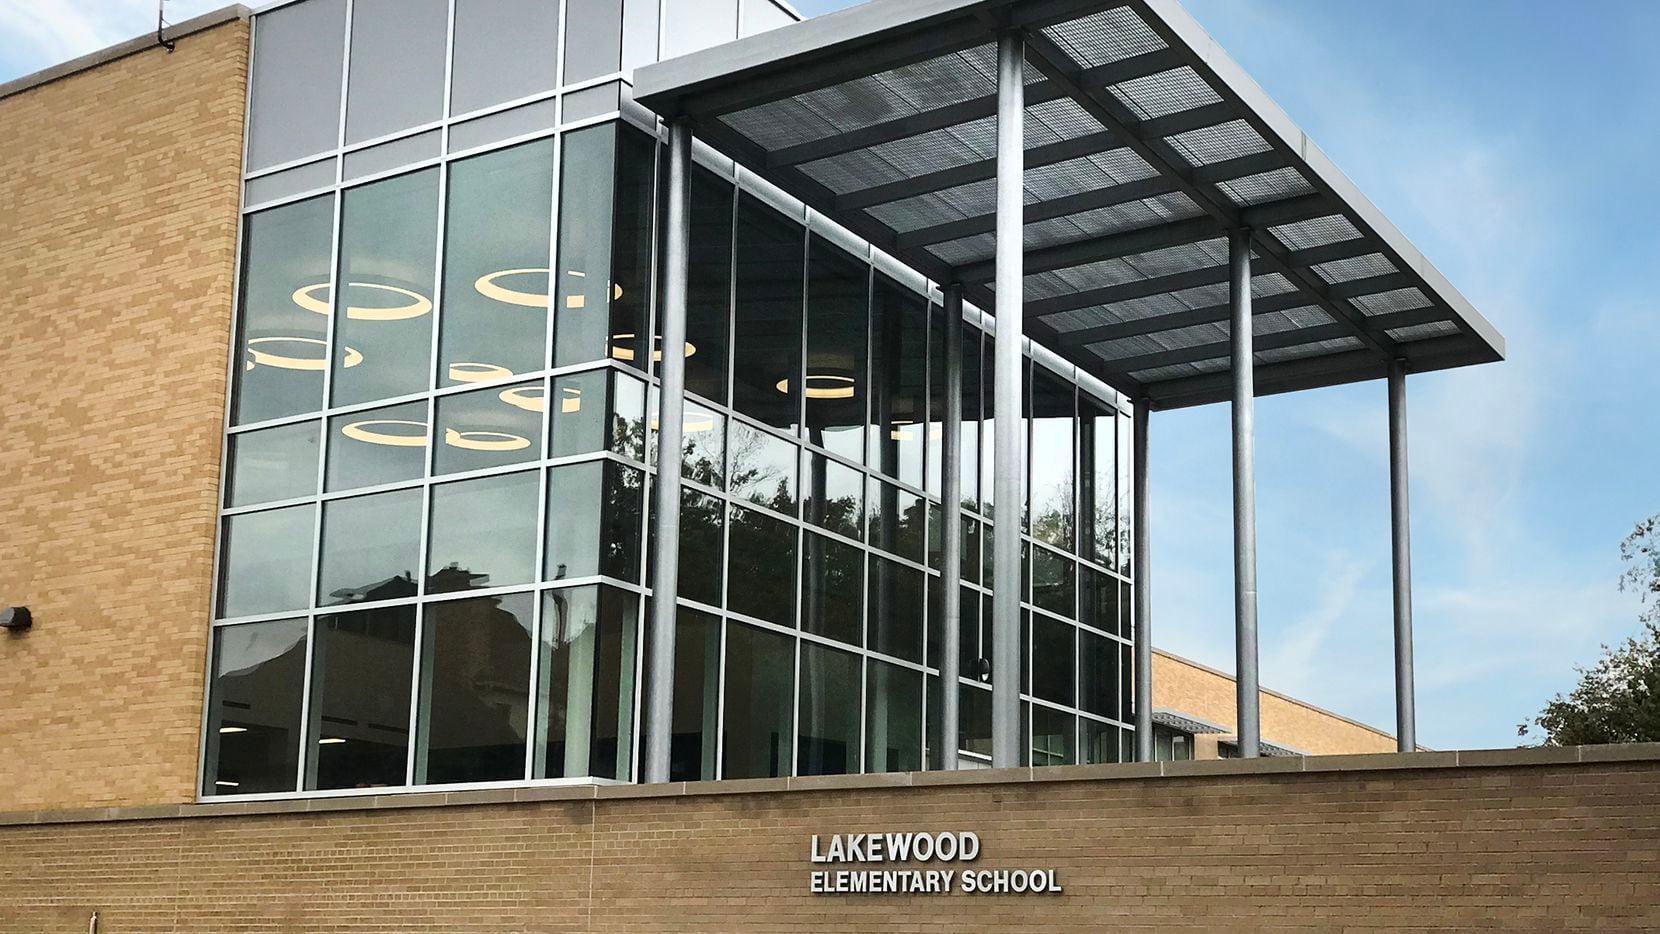 Desks for the new wing at Lakewood Elementary School and a renovation to the front office renovation and teachers’ lounge were made possible by underwriting support from Dave Perry-Miller Real Estate.